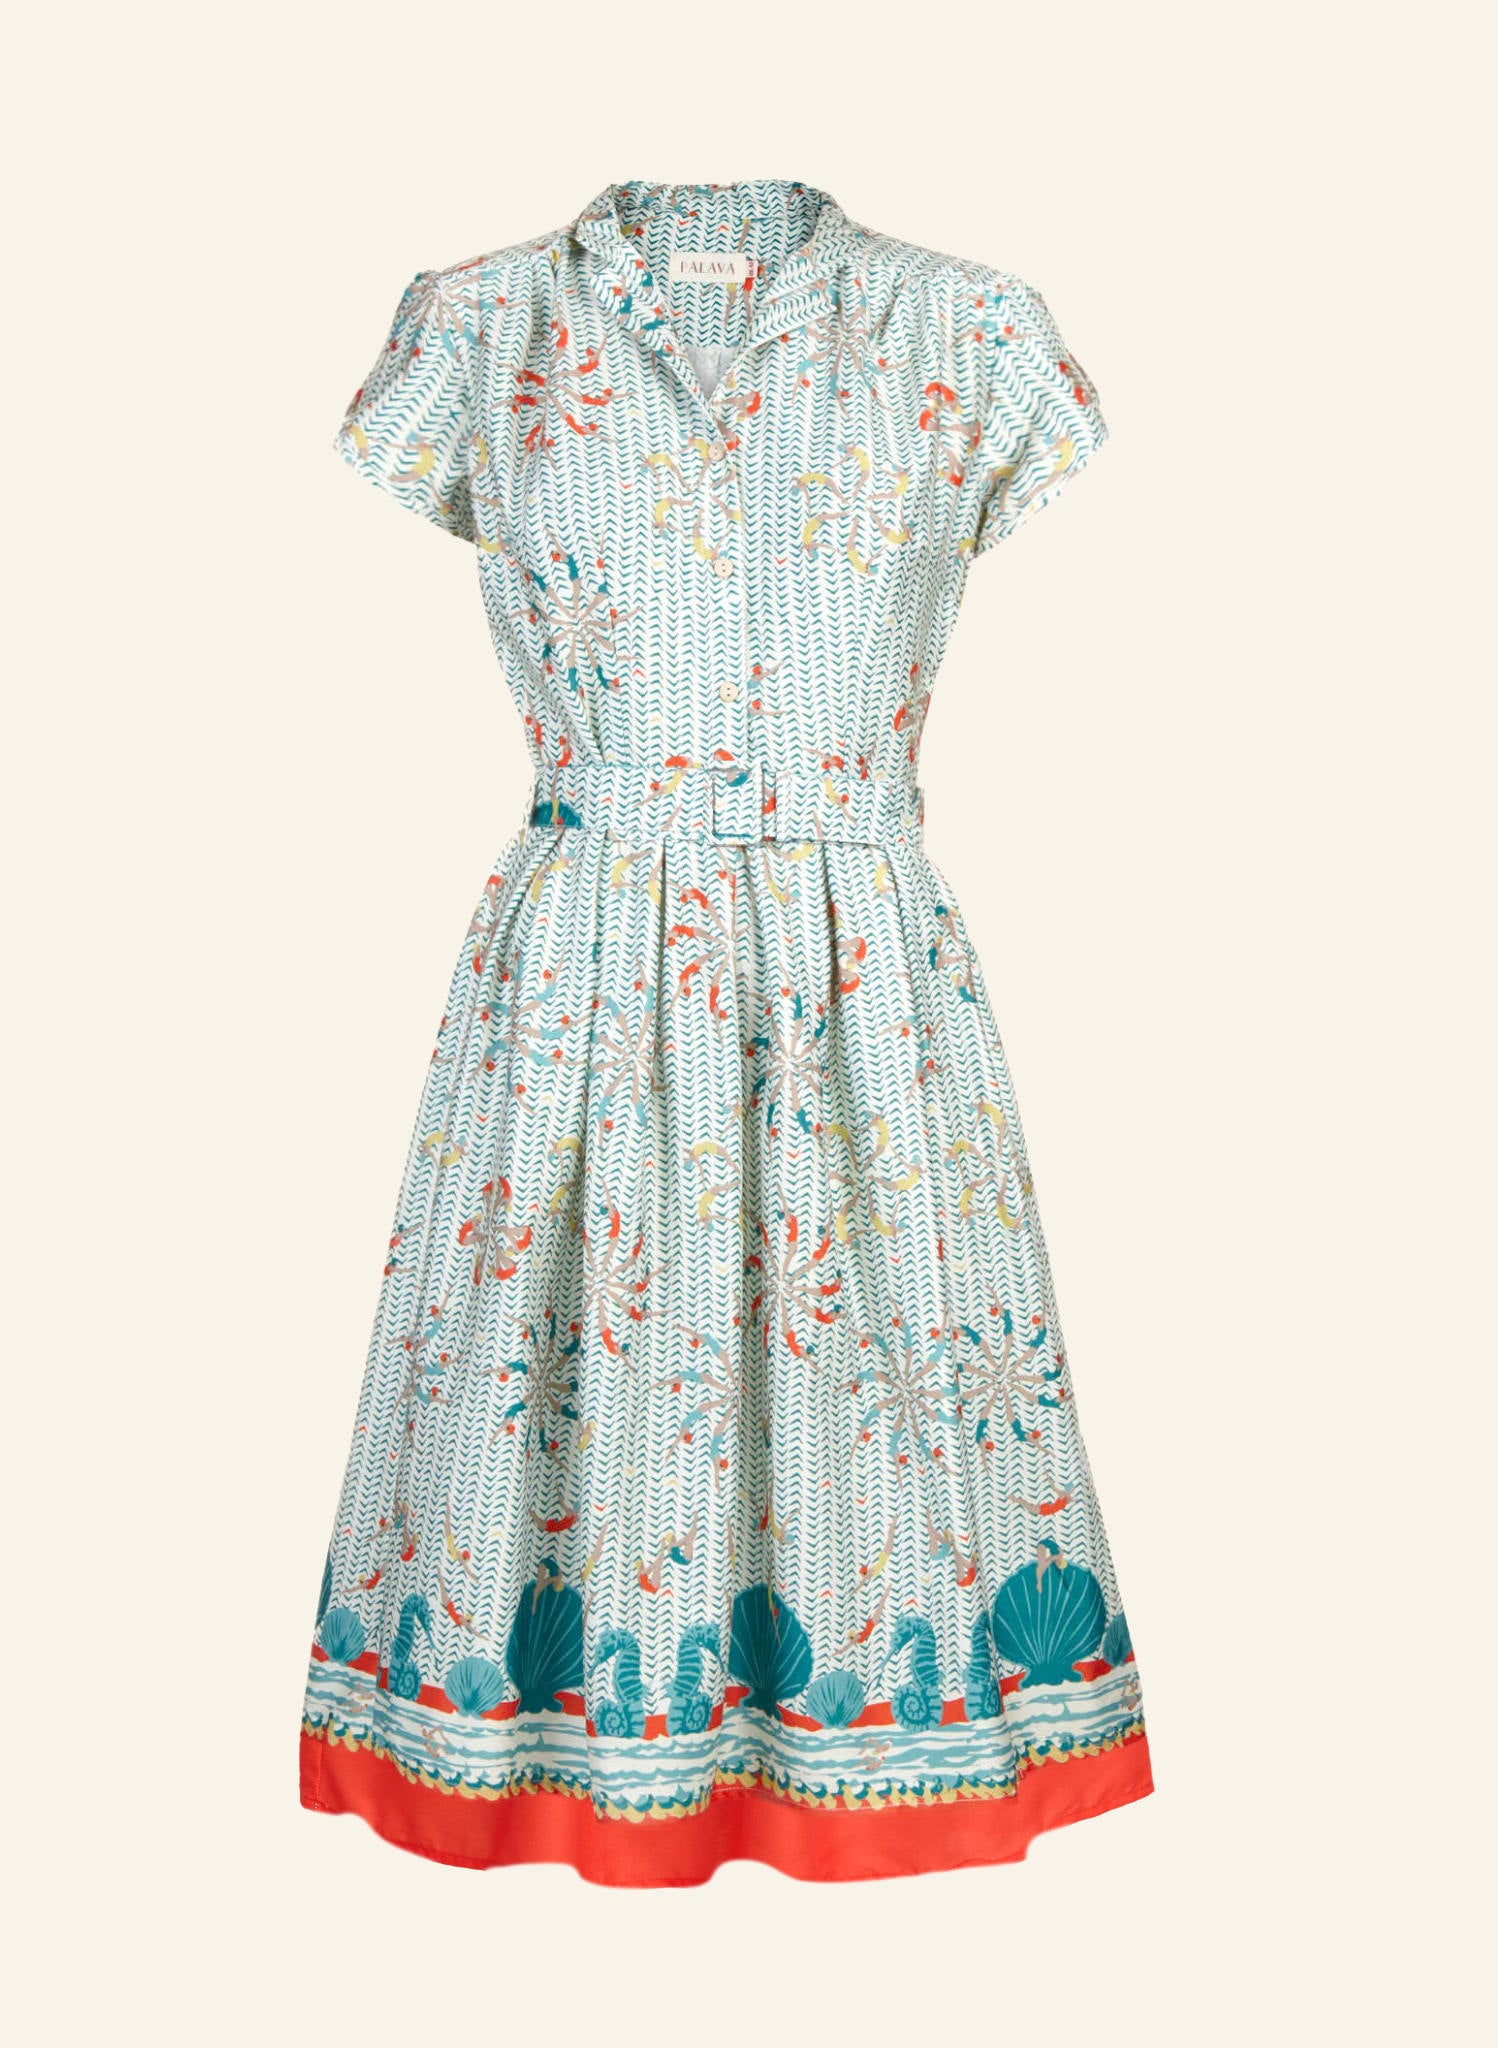 Teal & Red Swimmers Print Dress | 100% TENCEL™ | Made in UK